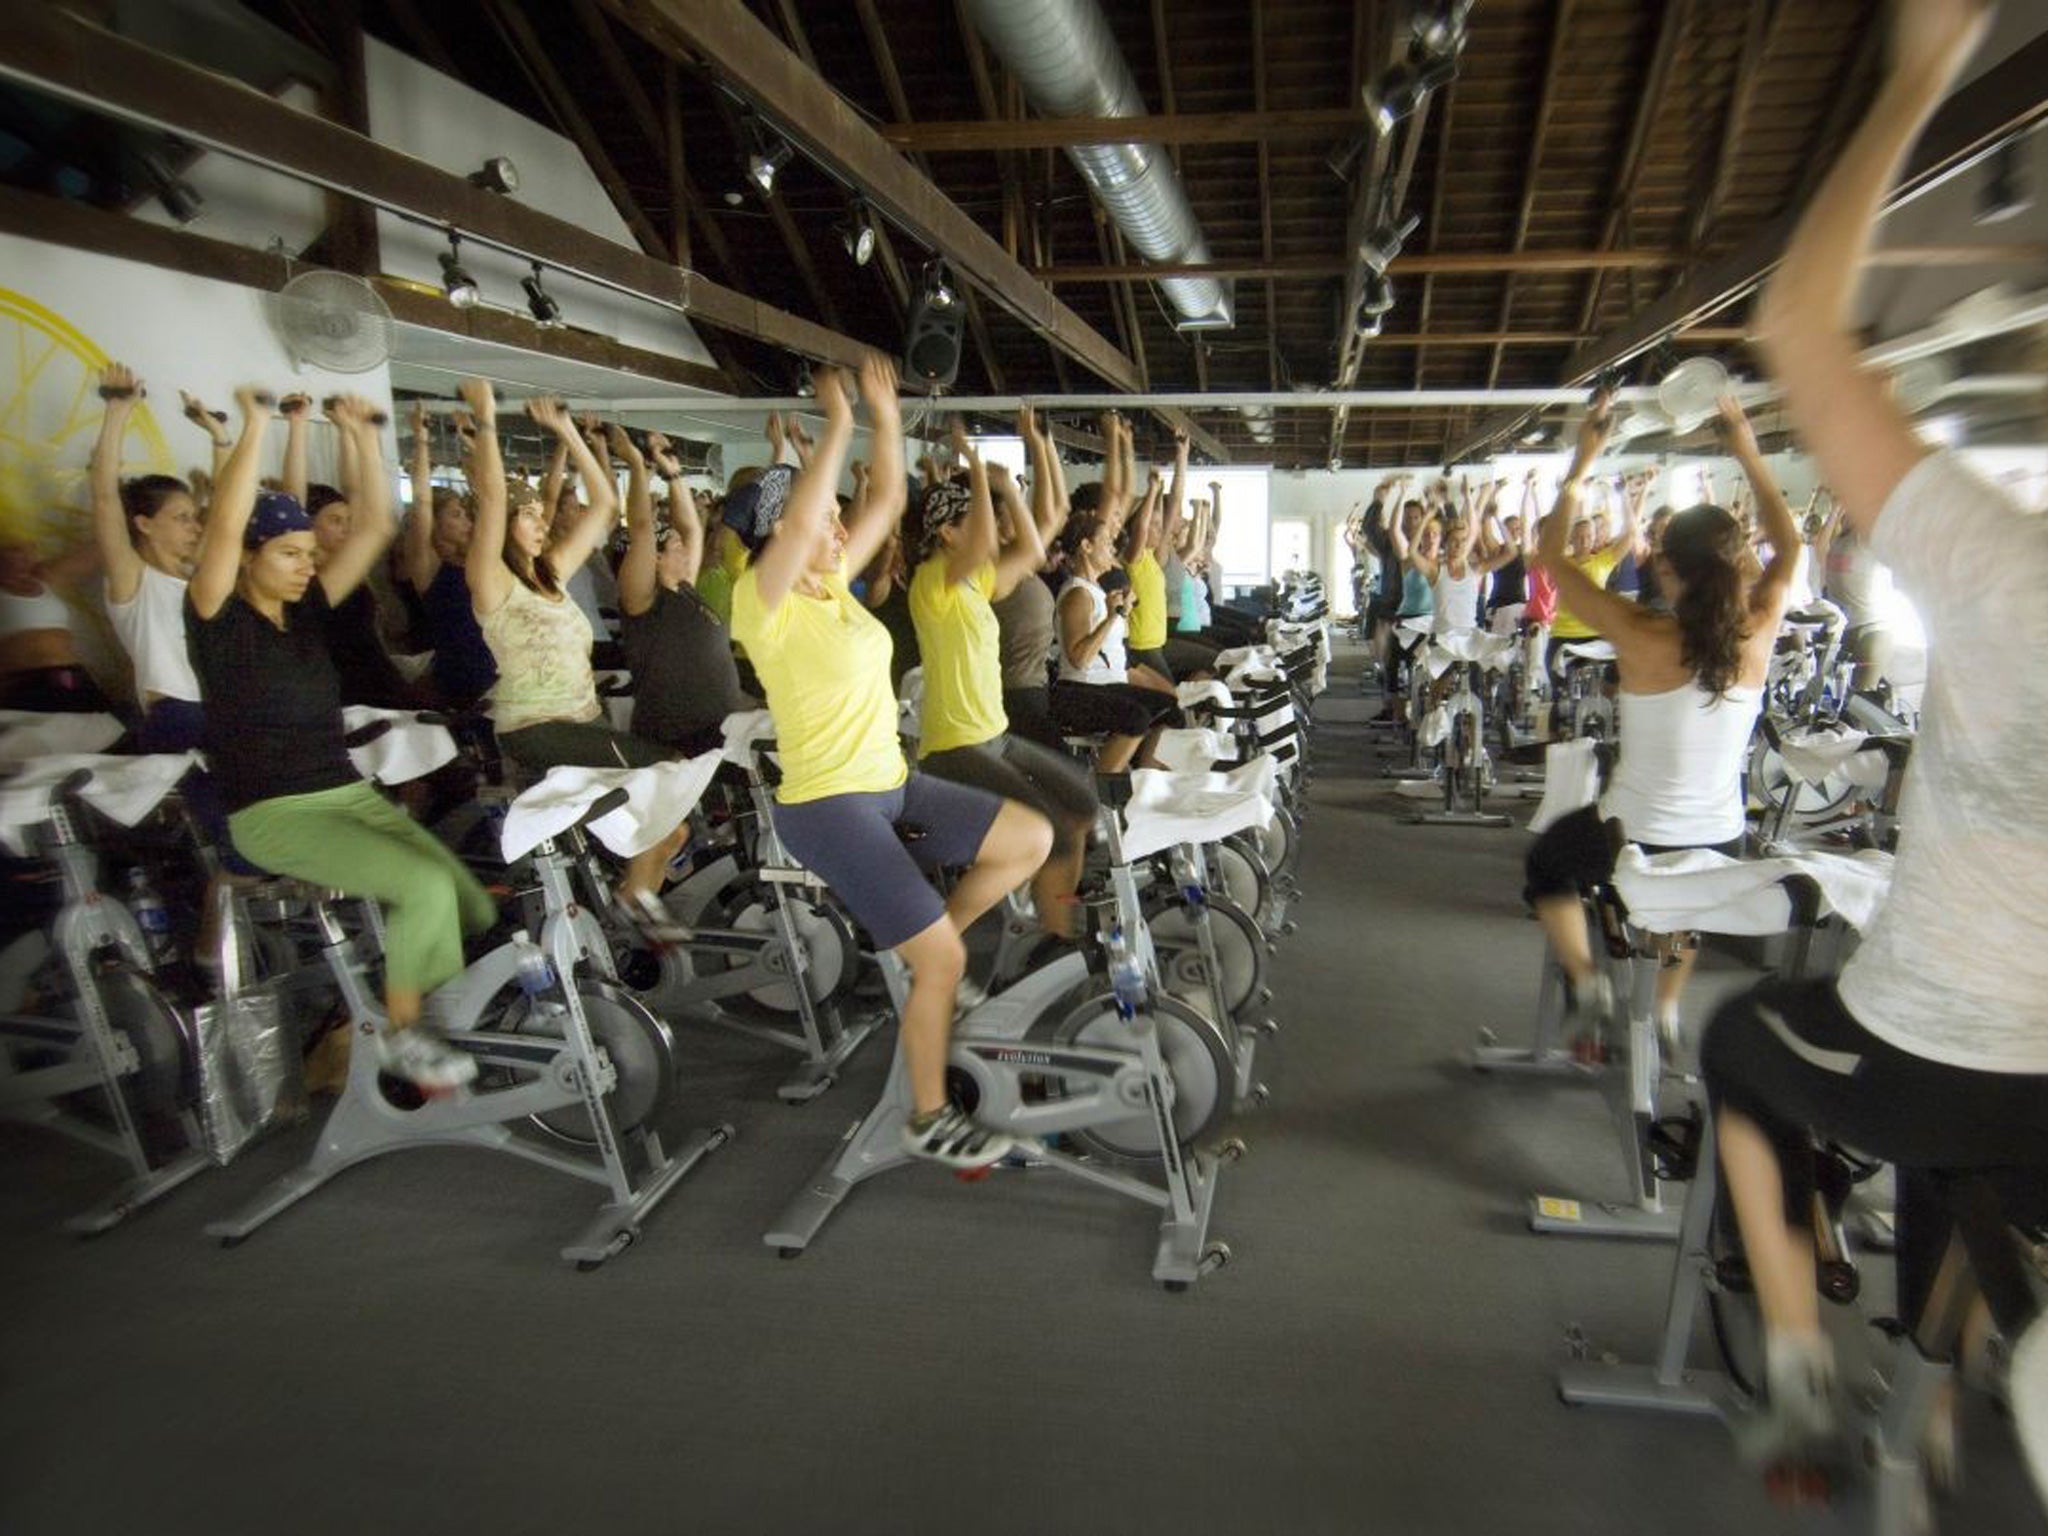 The wheel thing: a SoulCycle class